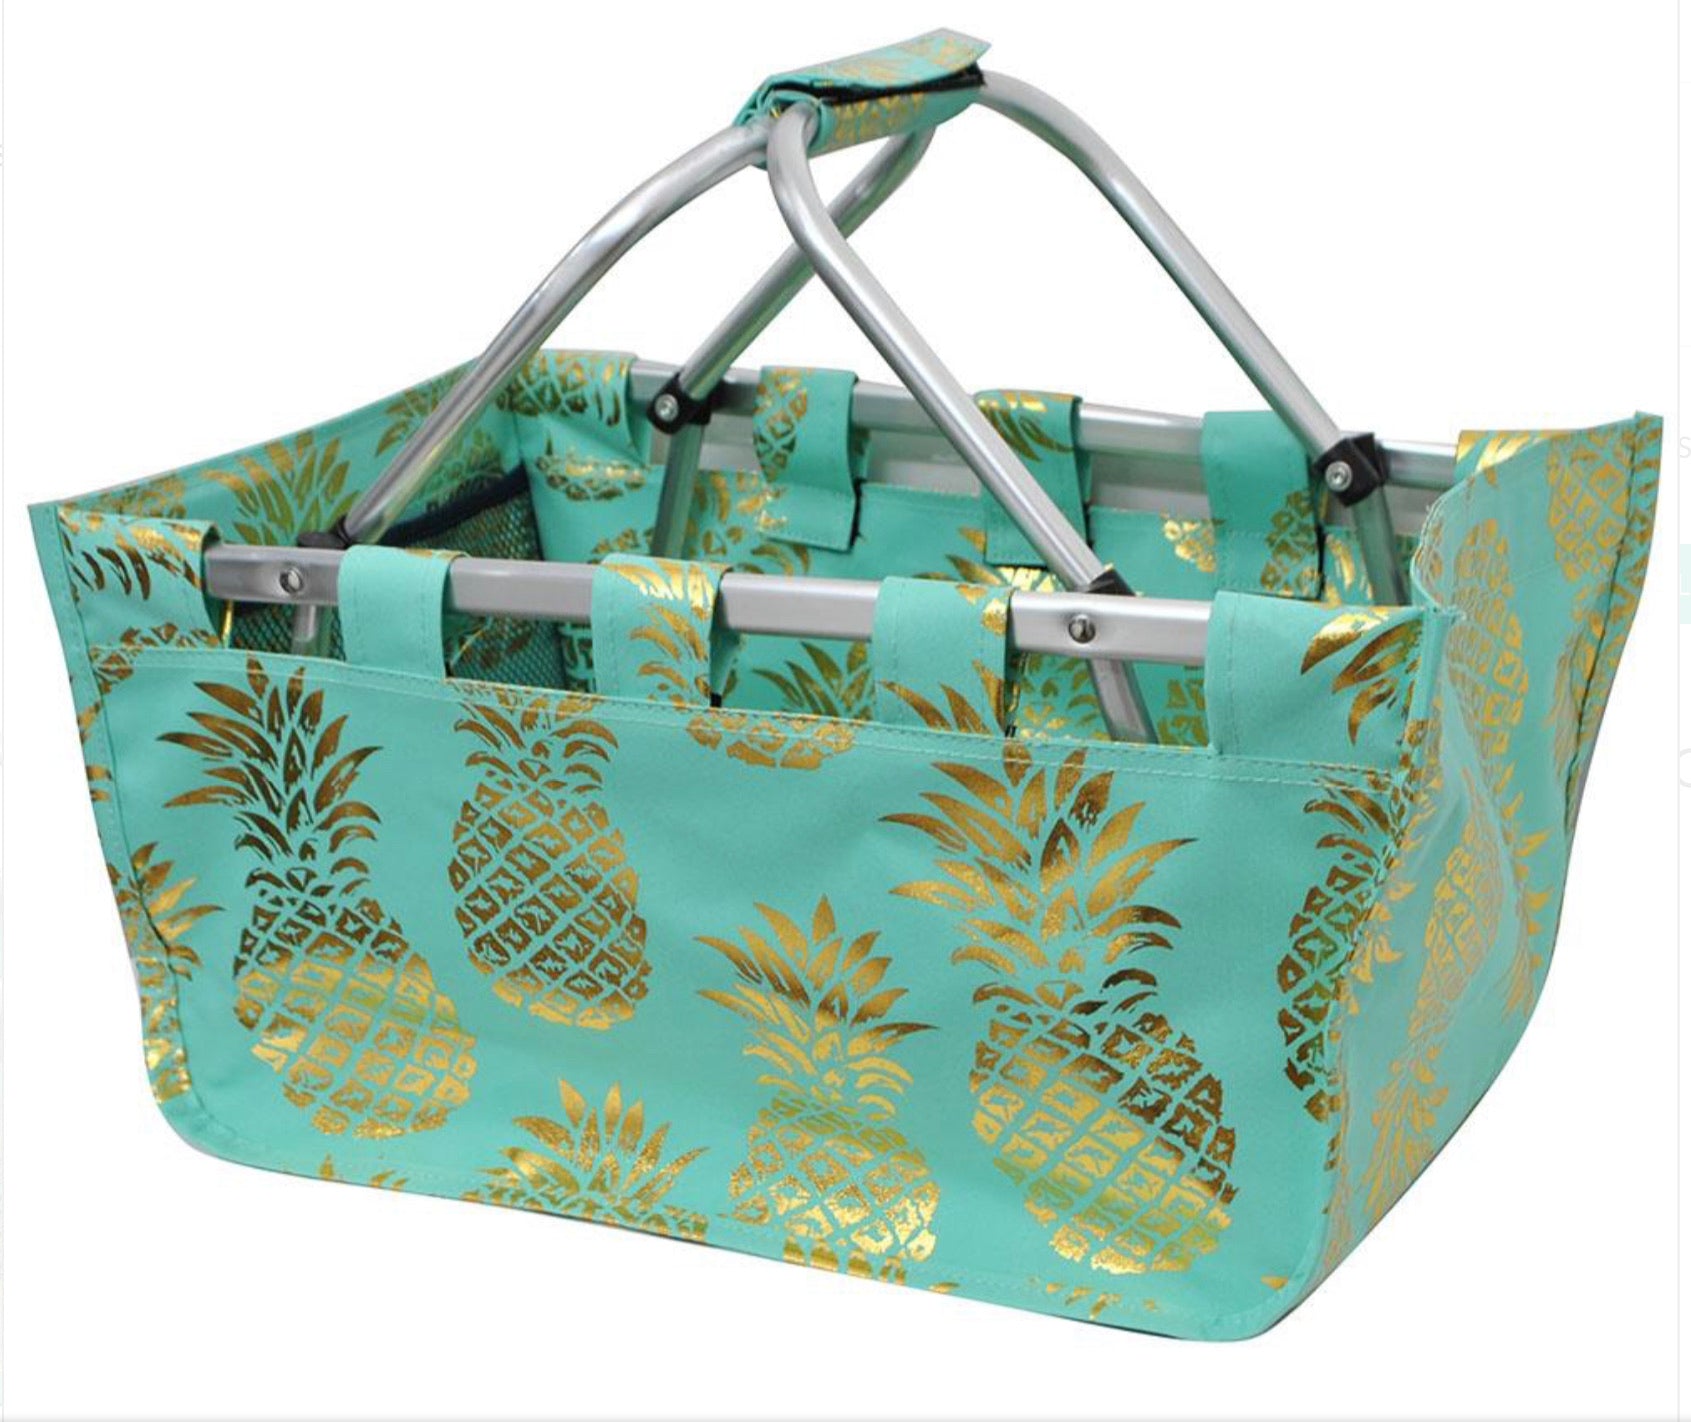 Collapsible Canvas Ball Park, Shopping, Market, Picnic and Pool Tote (NGIL Brand)